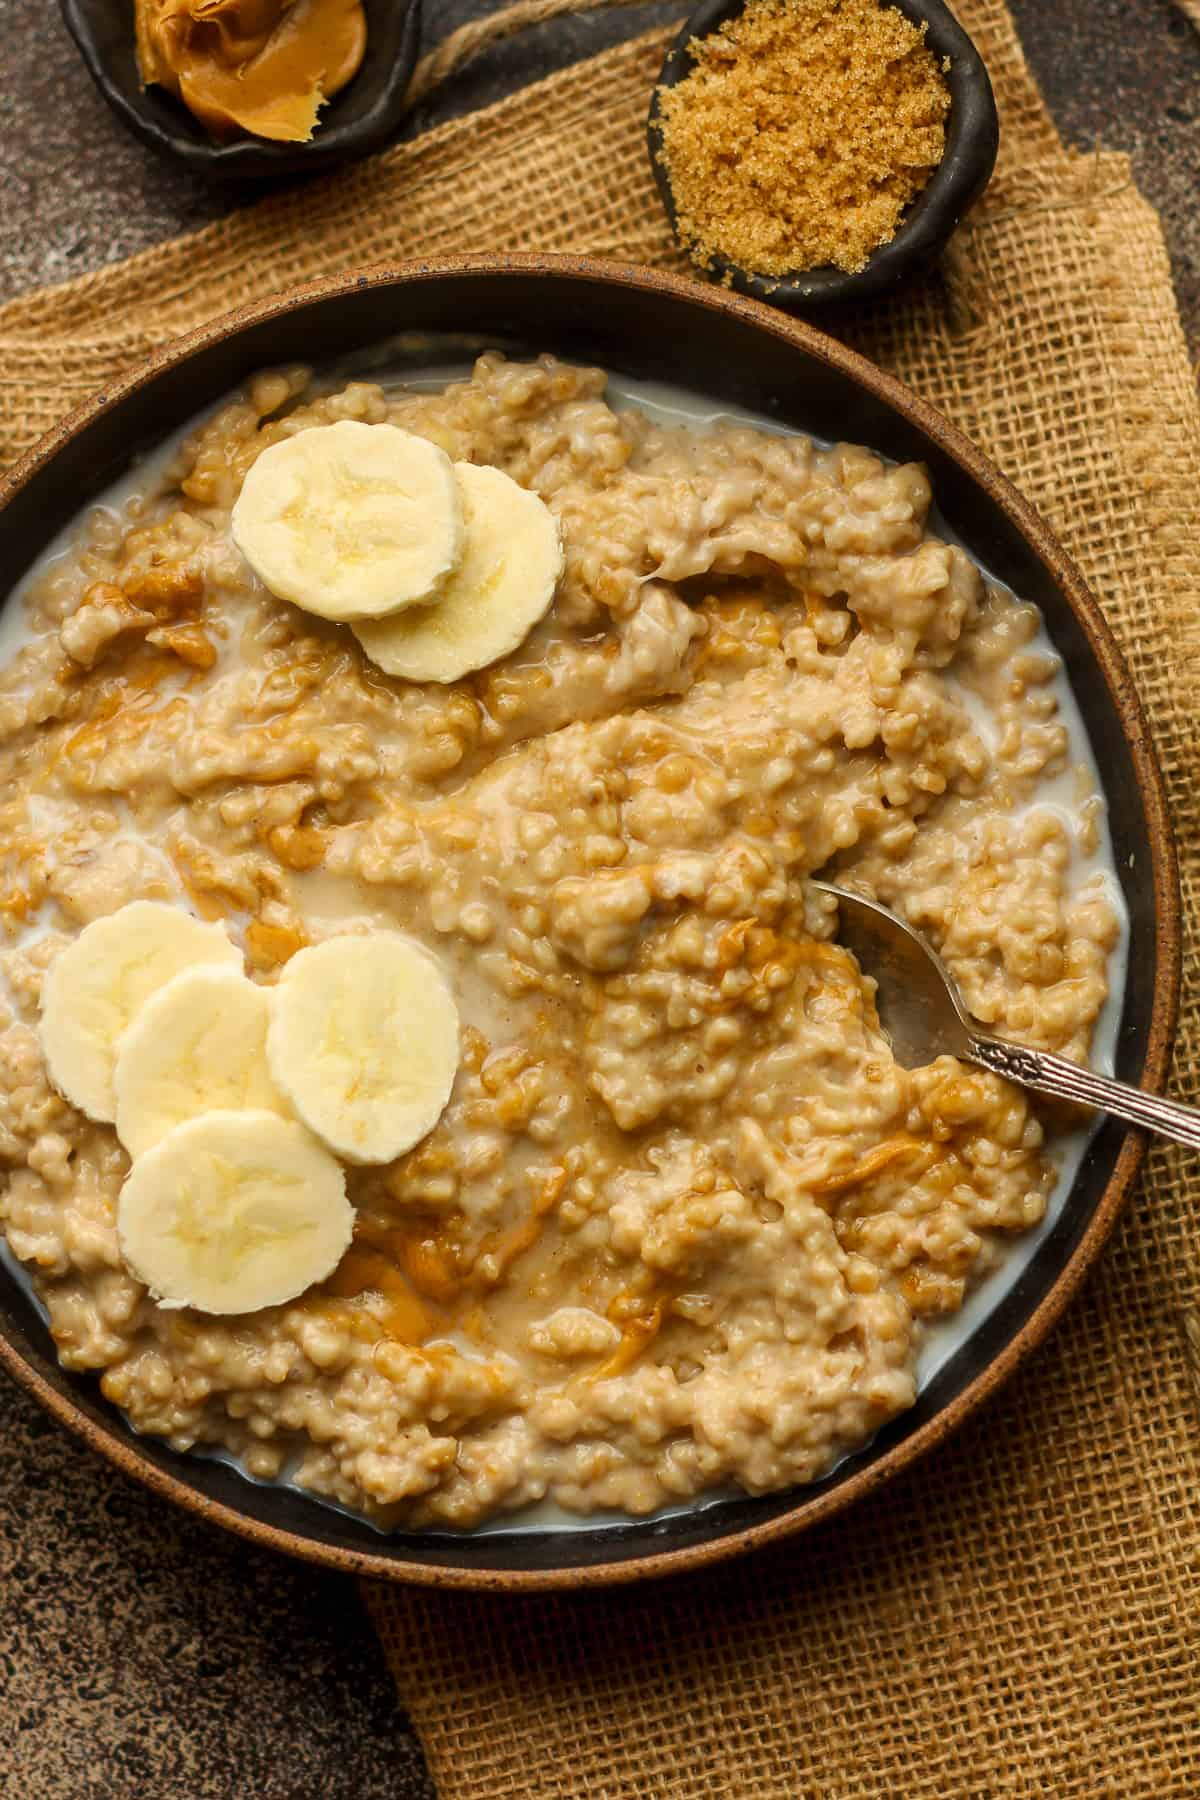 Closeup on a bowl of steel cut oats with banana slices.